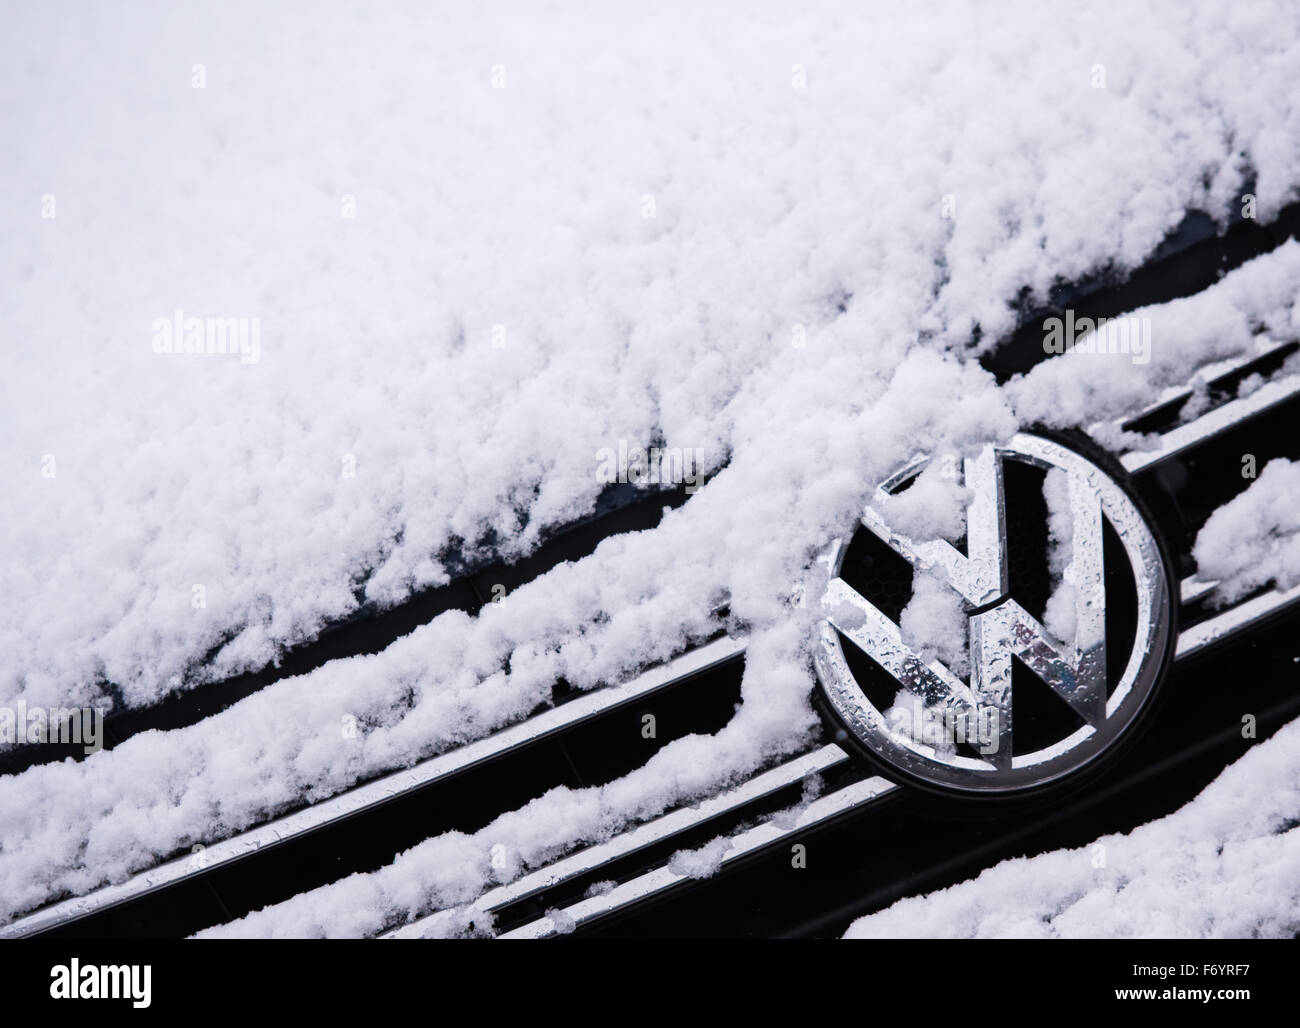 Luebeck, Germany. 22nd Nov, 2015. A snow-covered Volkswagen Tiguan can be seen in at a car dealership in Luebeck, Germany, 22 November 2015. Volkswagen is filing the first suggestions for dealing with the emissions scandal in the USA shortly before the expiration of an ultimatum. Photo: DANIEL BOCKWOLDT/dpa/Alamy Live News Stock Photo